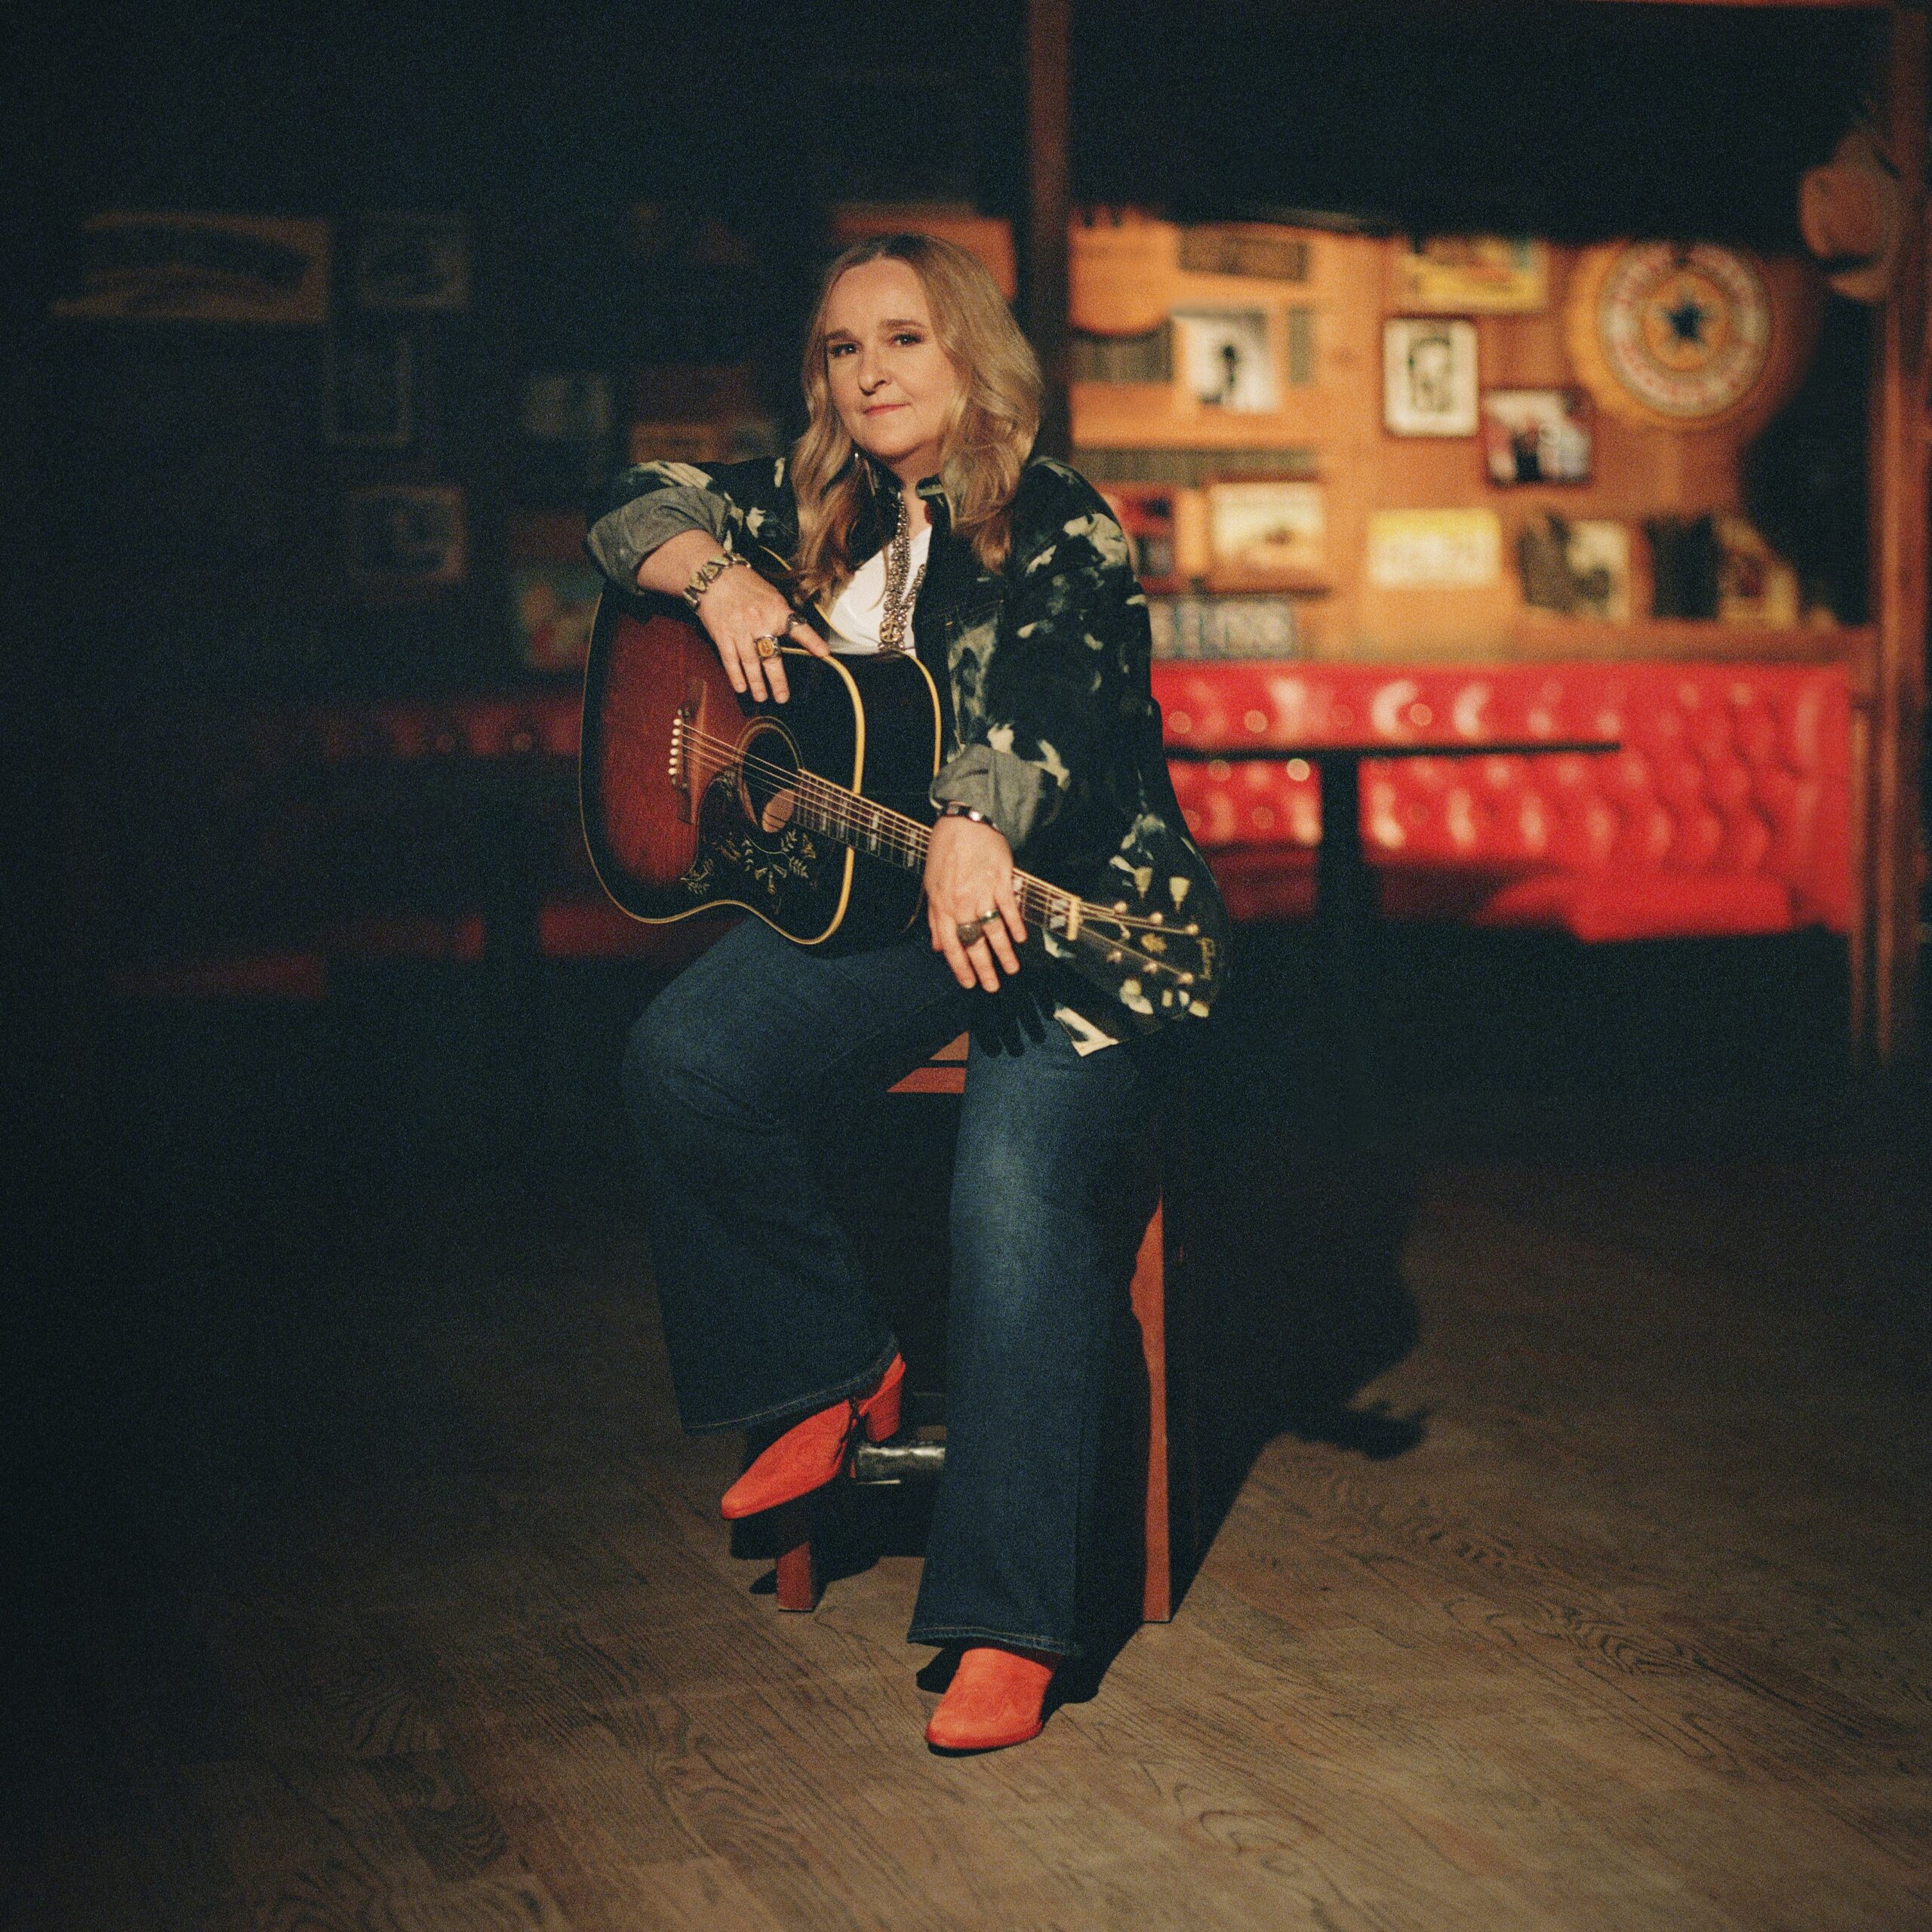 A photo of Melissa Etheridge sitting on a stool with an acoustic guitar.